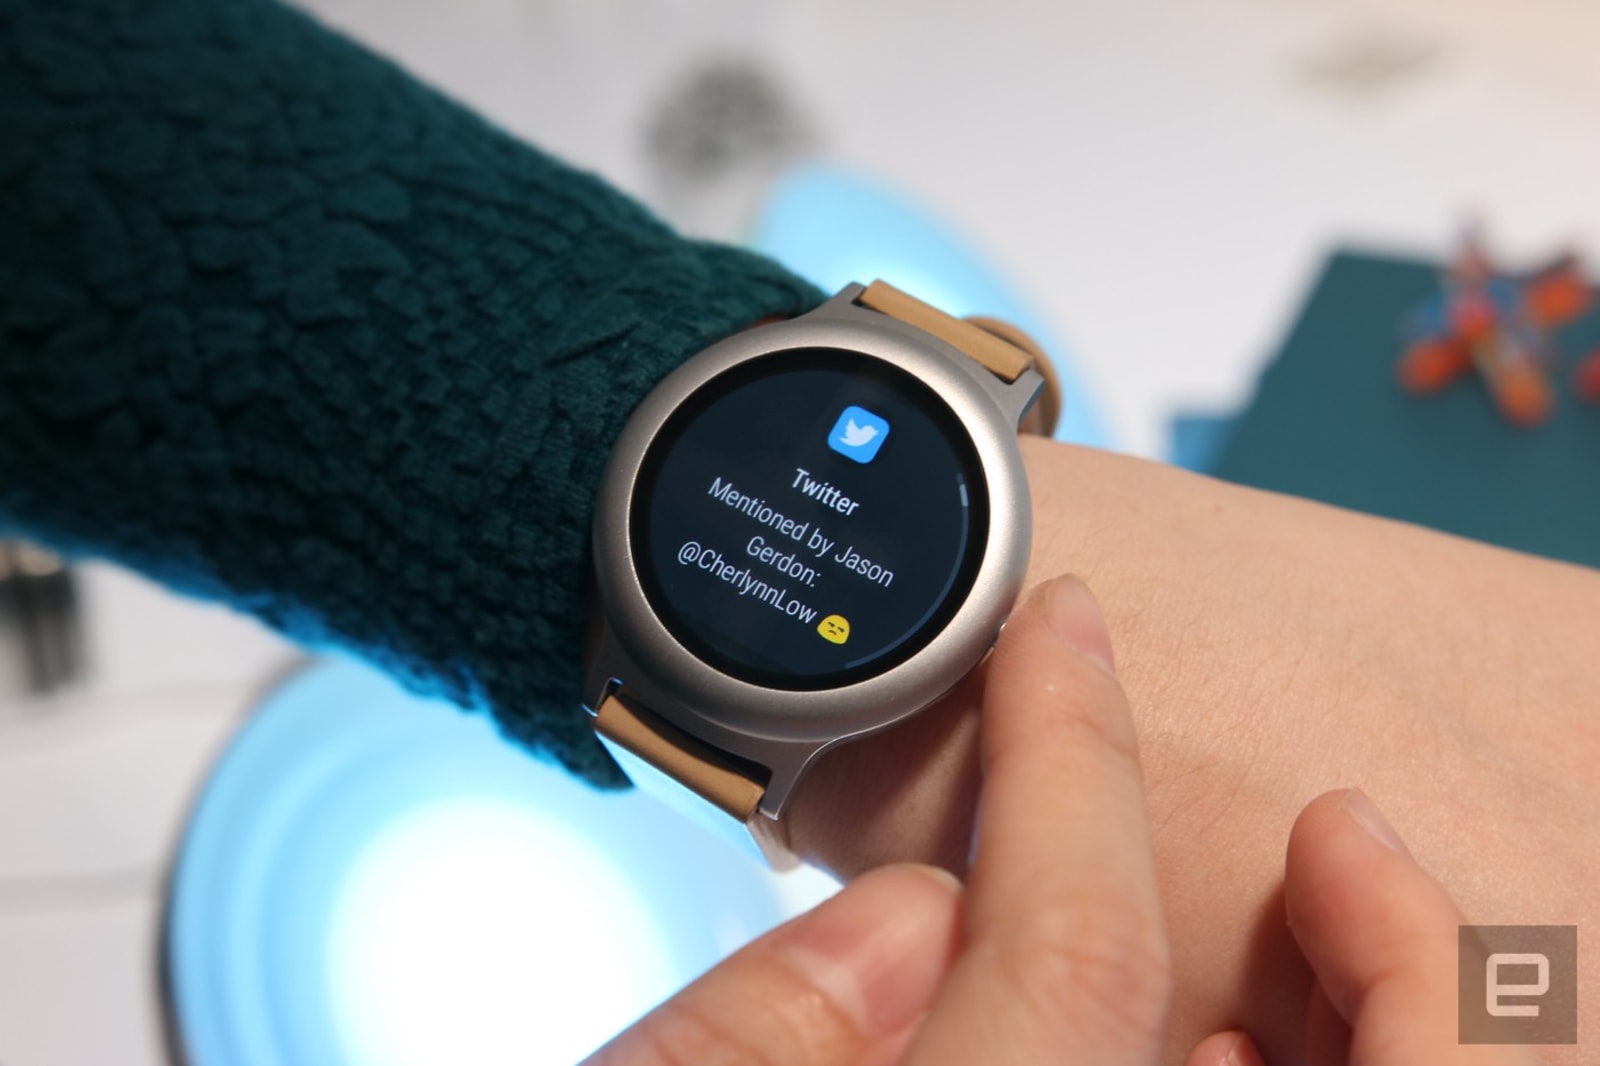 lg smartwatch for android